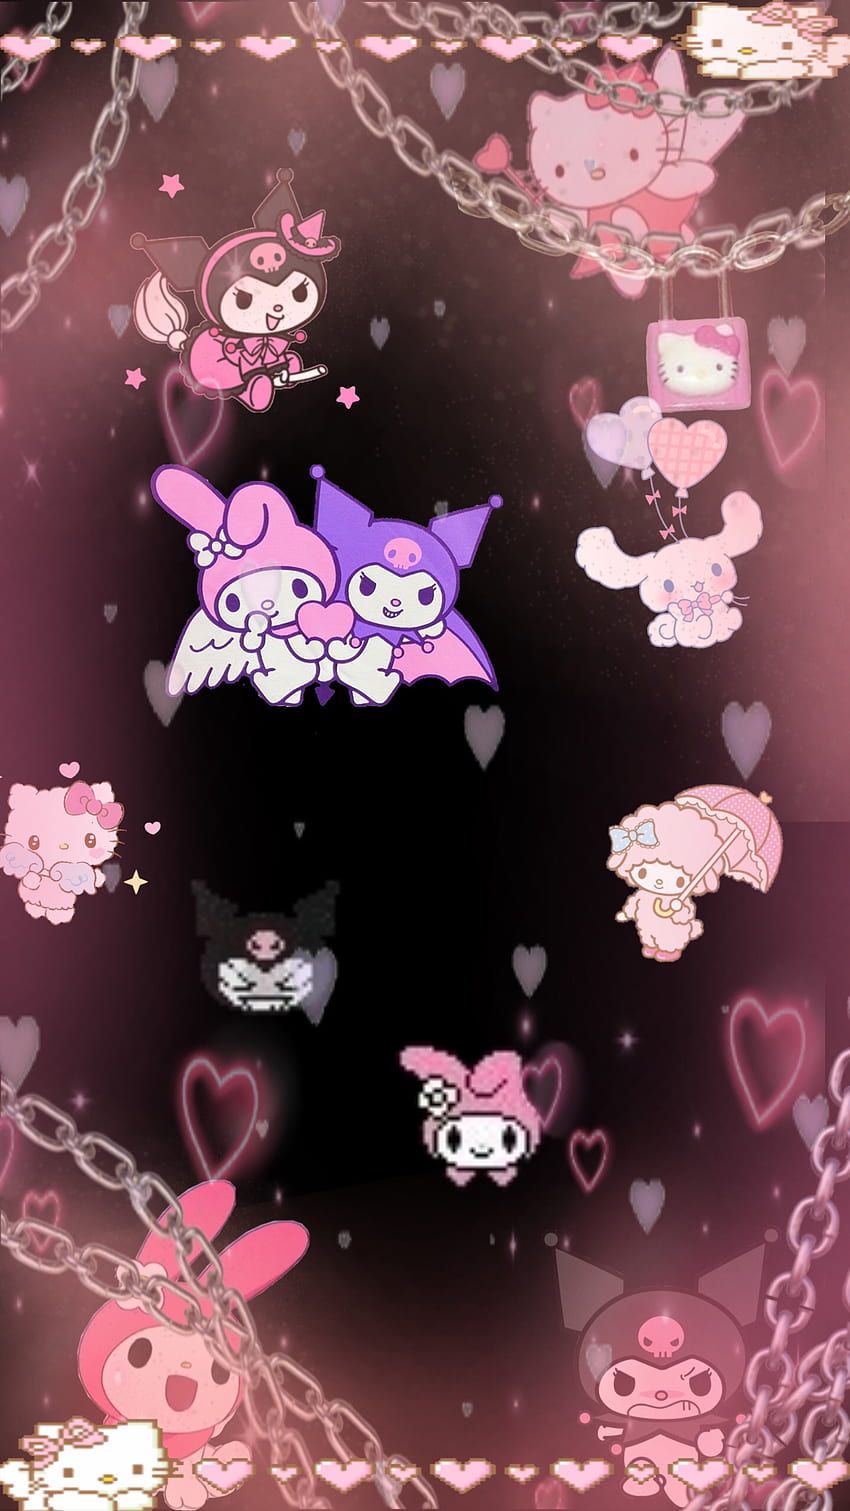 A photograph captures a collection of cute, cartoon figures, including two bunnies, several hearts, and other characters on a dark background. The 4-layer collage features a series of different hearts, with some of them chained to a chain or chain link fence. The cartoon characters are dispersed throughout the collage, creating a fun and colorful atmosphere. In addition, there are  - Traumacore